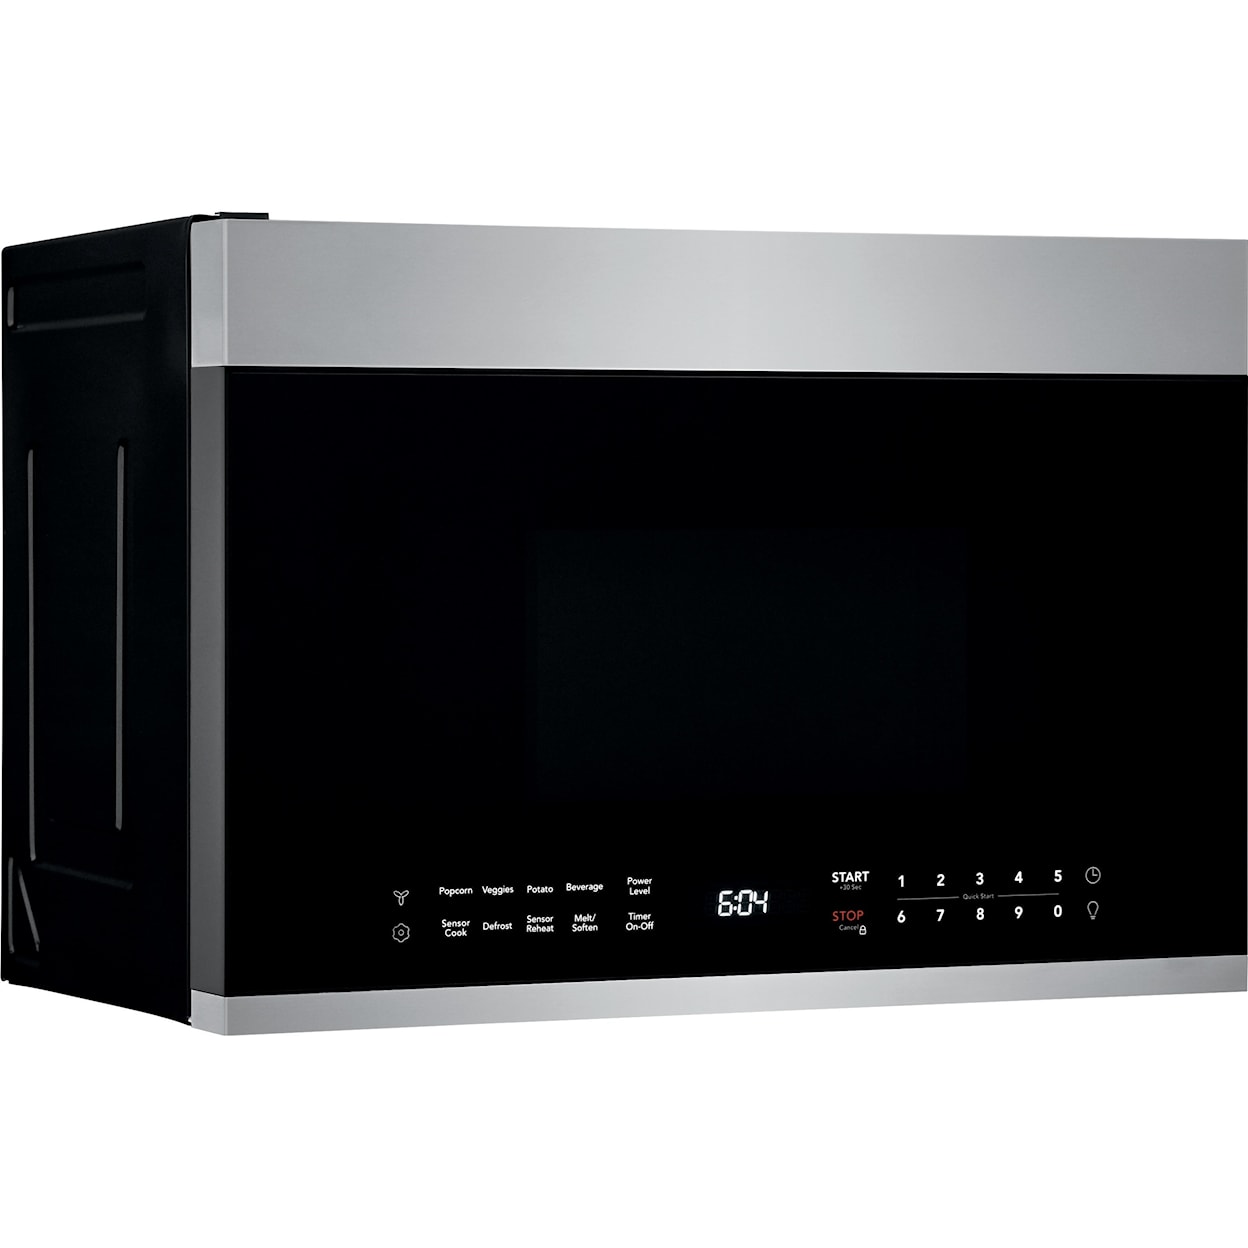 Frigidaire Microwaves 1.4 Cu. Ft. Over-The-Range Microwave